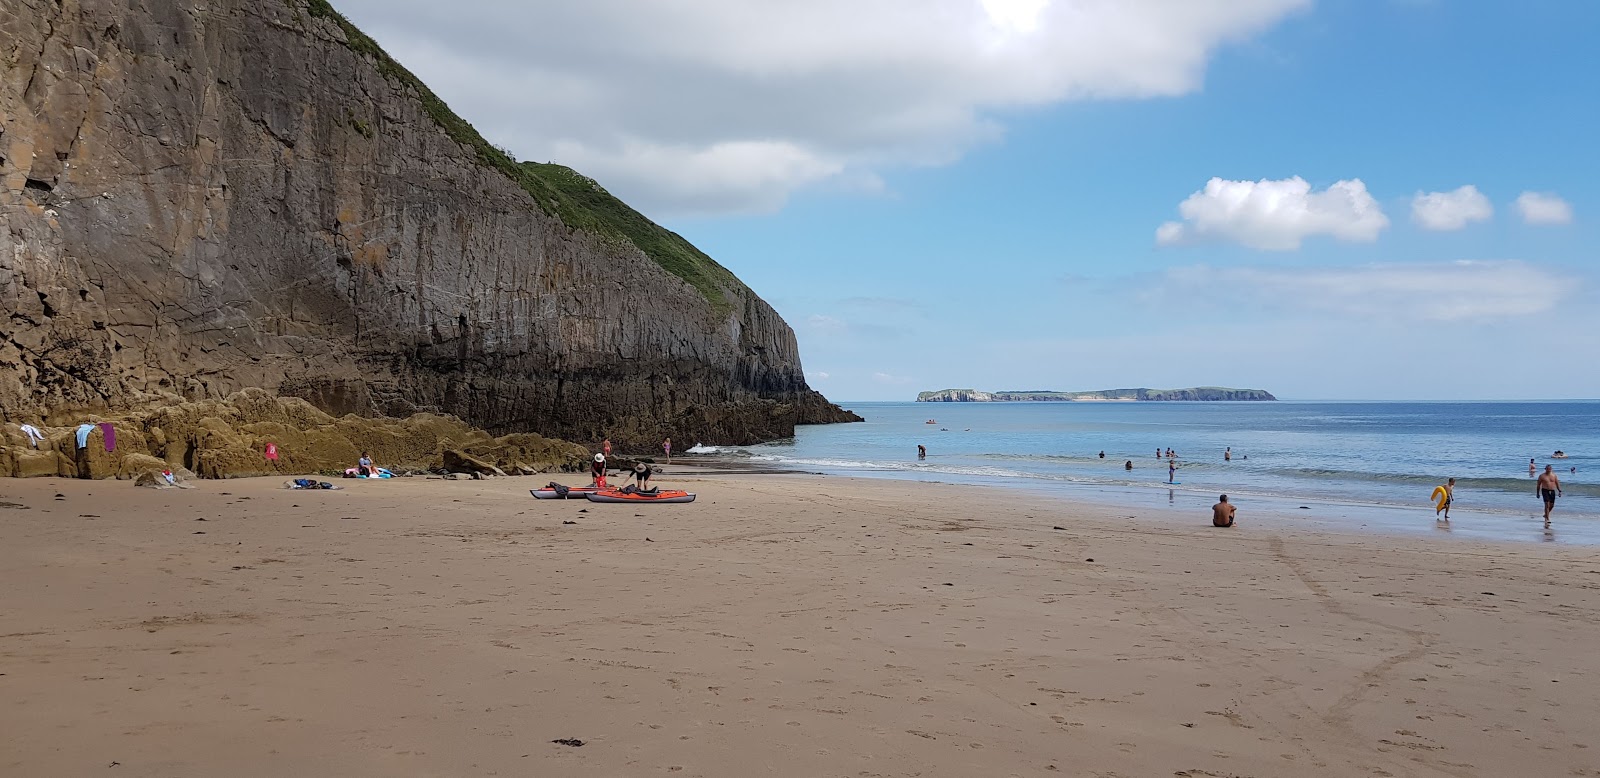 Photo of Skrinkle Haven beach and its beautiful scenery